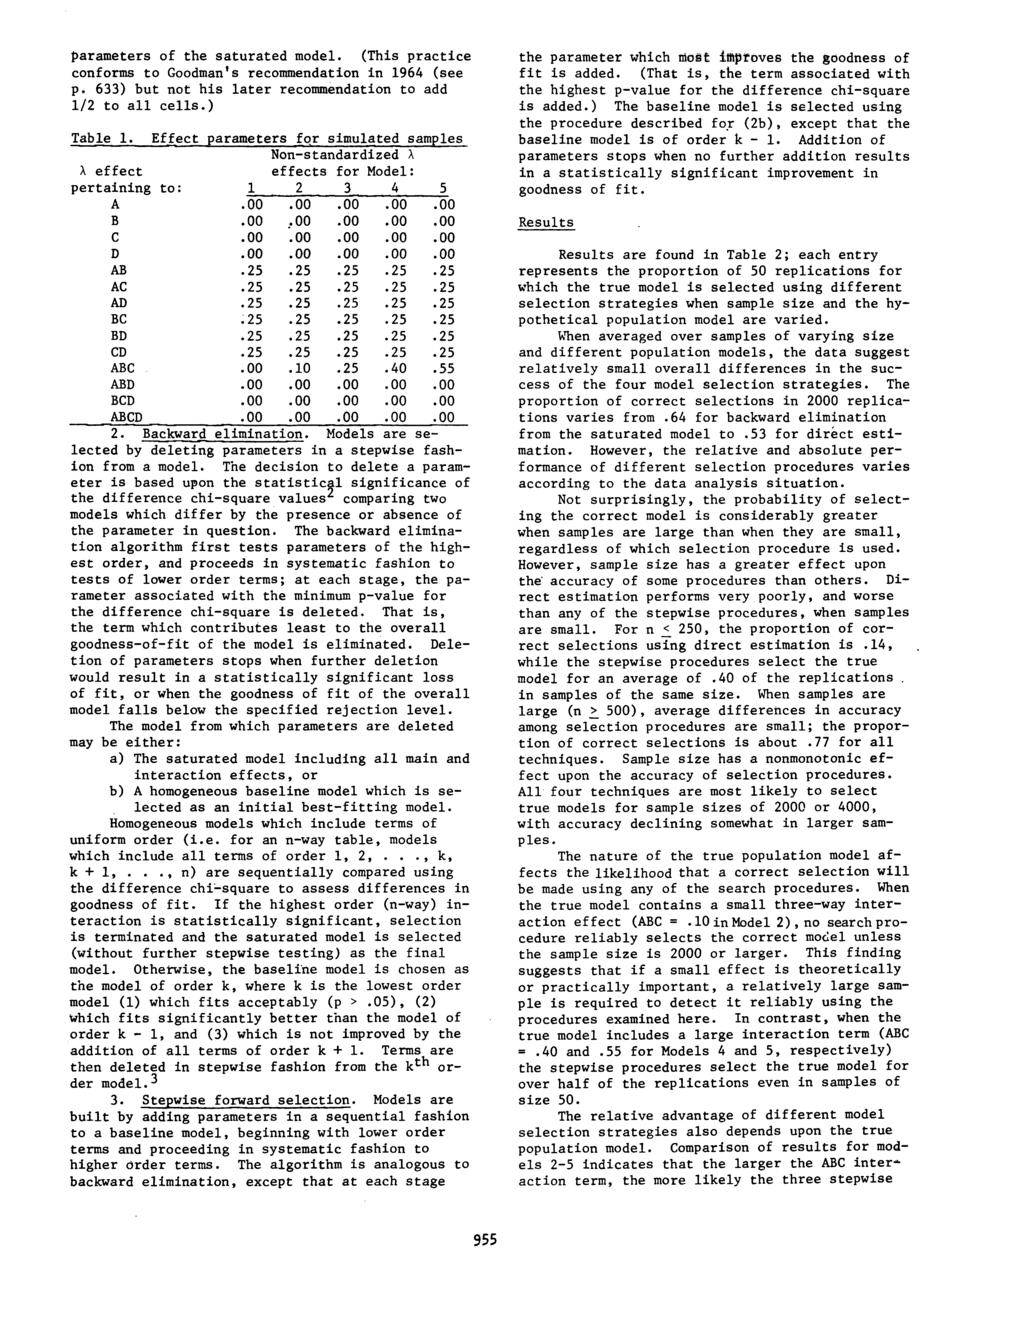 parameters of the saturated model. (This practice conforms to Goodman's recommendation in 1964 (see p. 633) but not his later recommendation to add 1/2 to all cells.) Table 1.